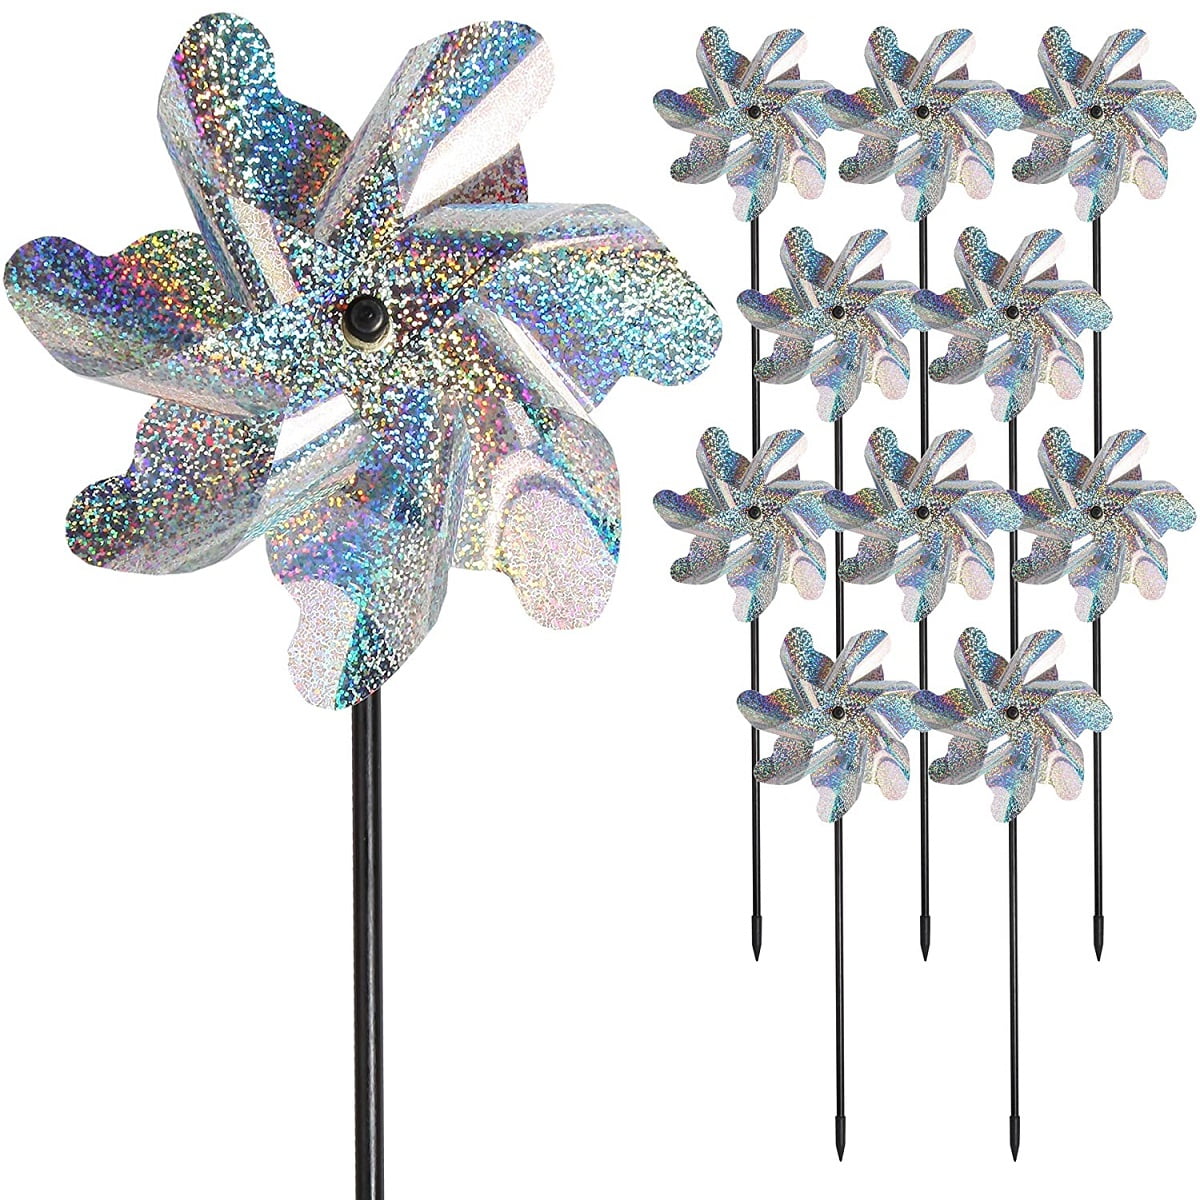 Bird Repellent Reflective Pinwheel Sparkly Holographic Silver Spinners NP_fr 